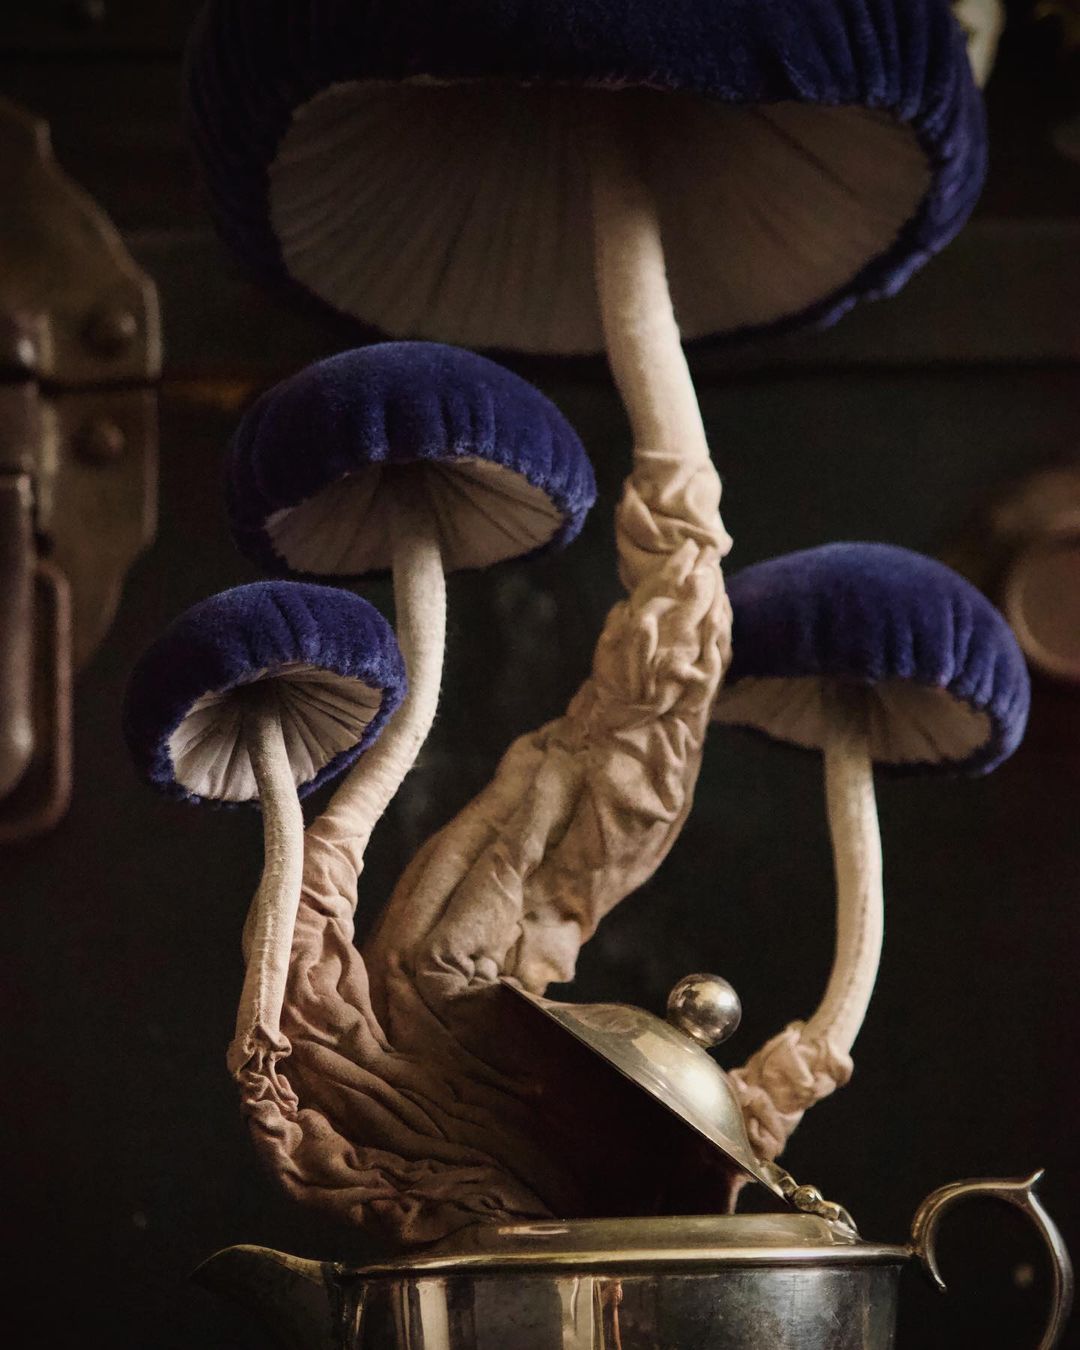 Witchy Mushrooms The Beautifully Nature Inspired Textile And Fiber Art Of Adrianna Eve 4